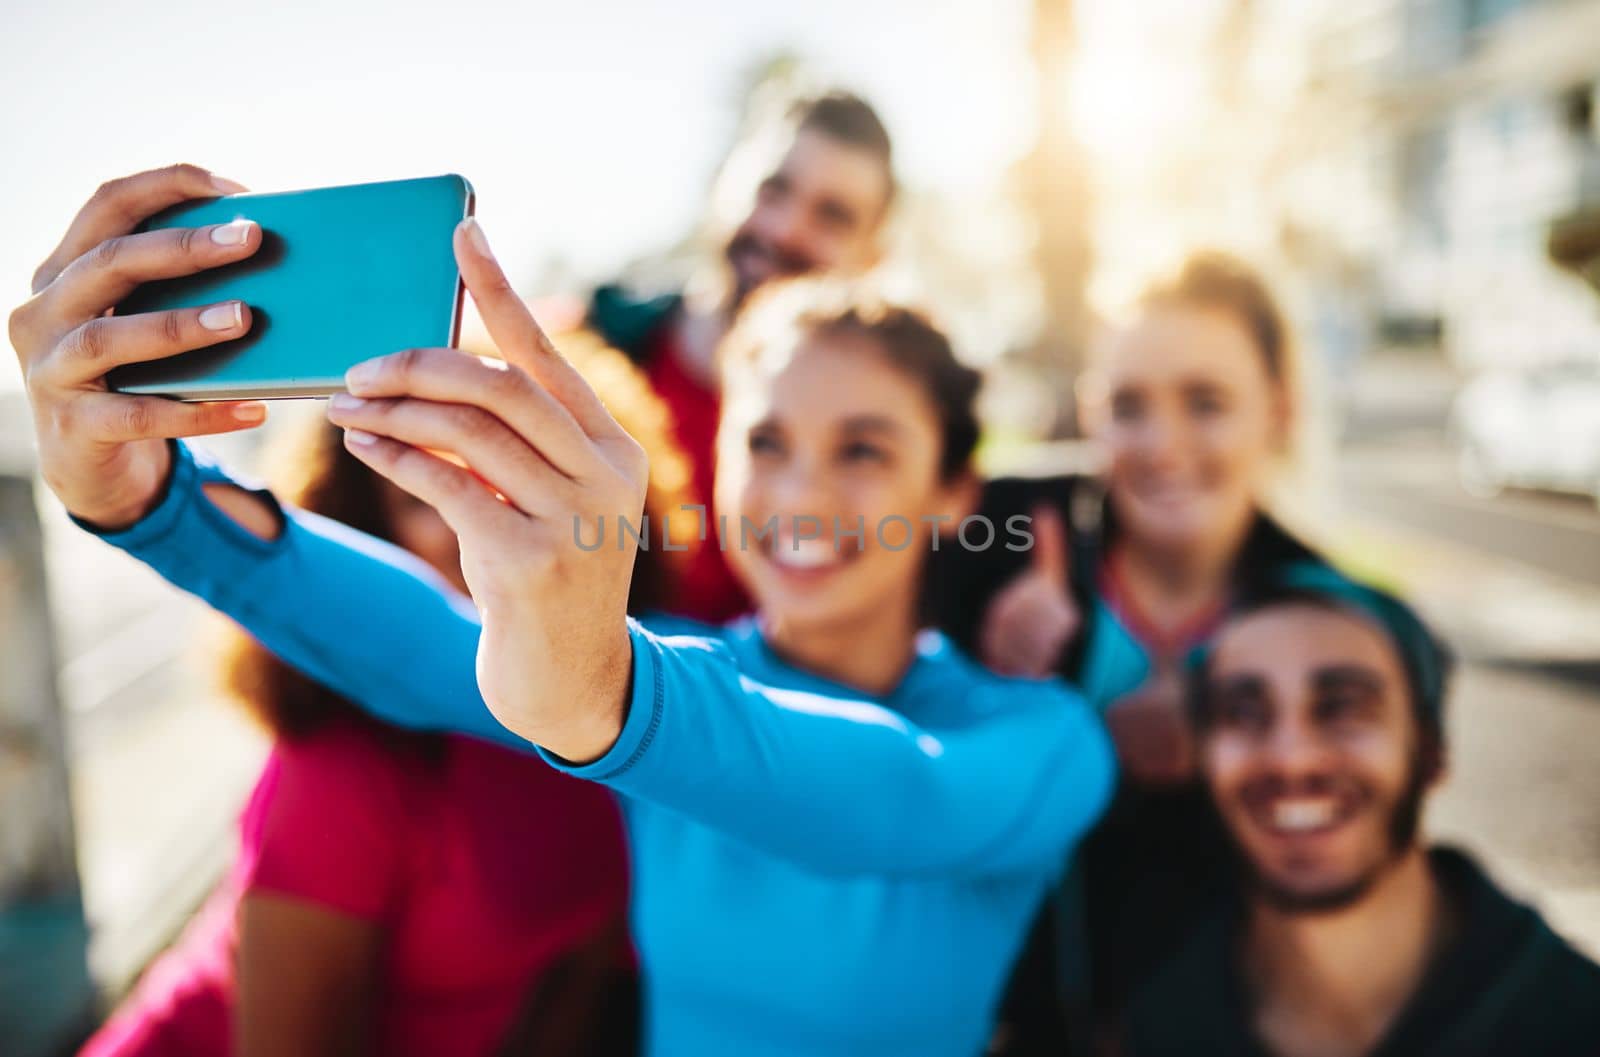 You get more than a workout when exercising with friends. a fitness group taking a selfie while out for a run on the promenade